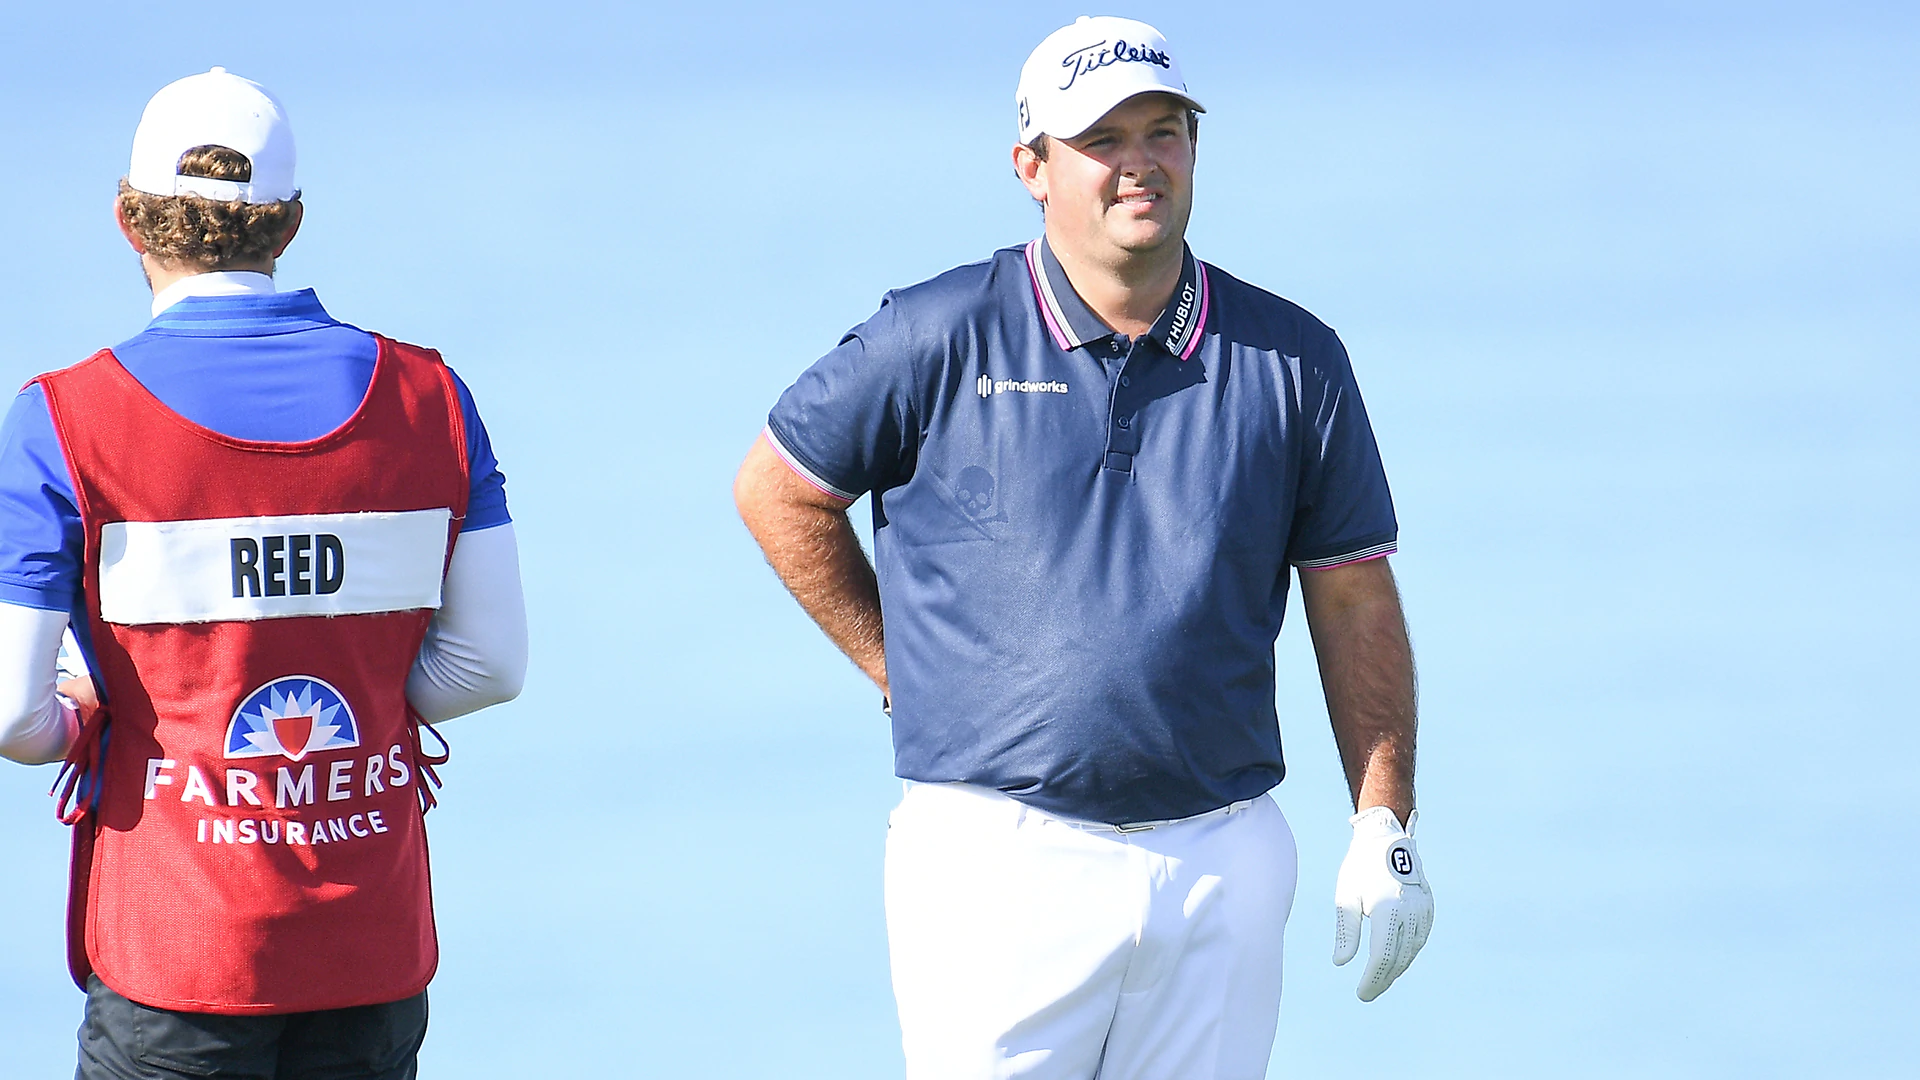 Patrick Reed, Alex Noren shoot 64s on North Course to share Farmers lead